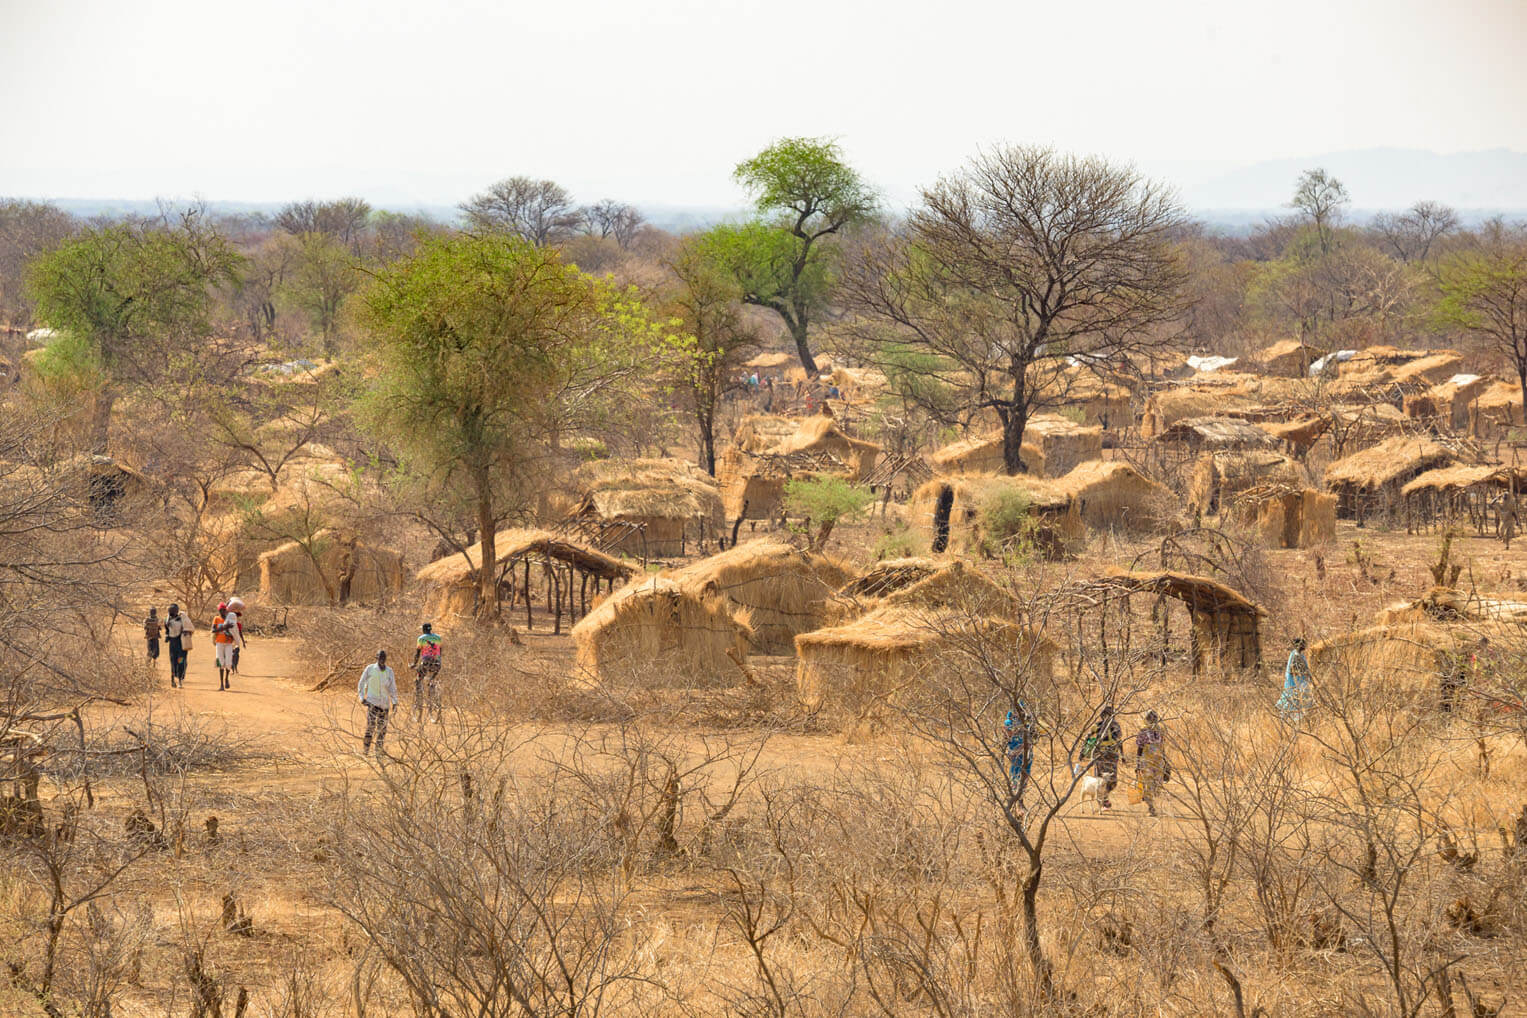 Displaced Sudanese families built makeshift shelters in a refugee camp.